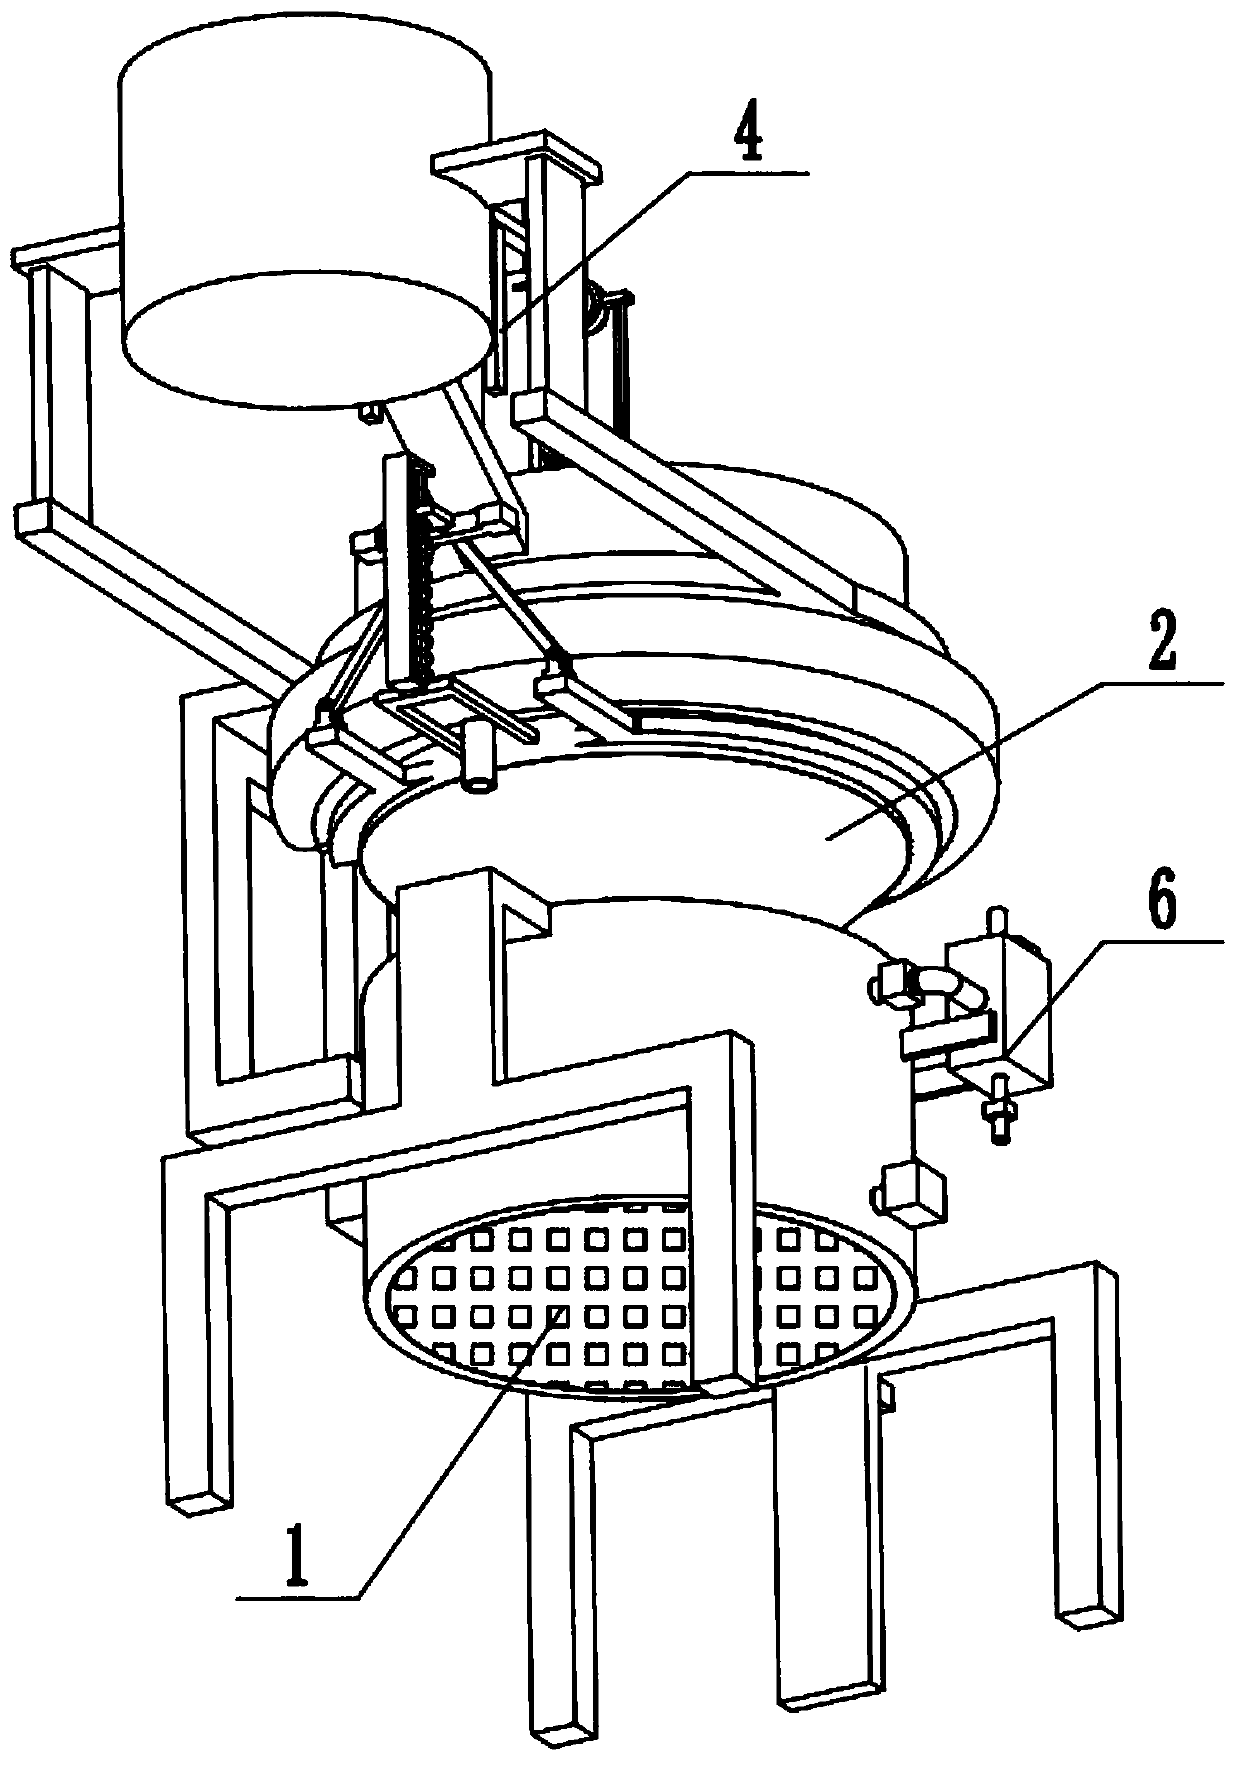 Medical waste pollution-free combustion treatment device